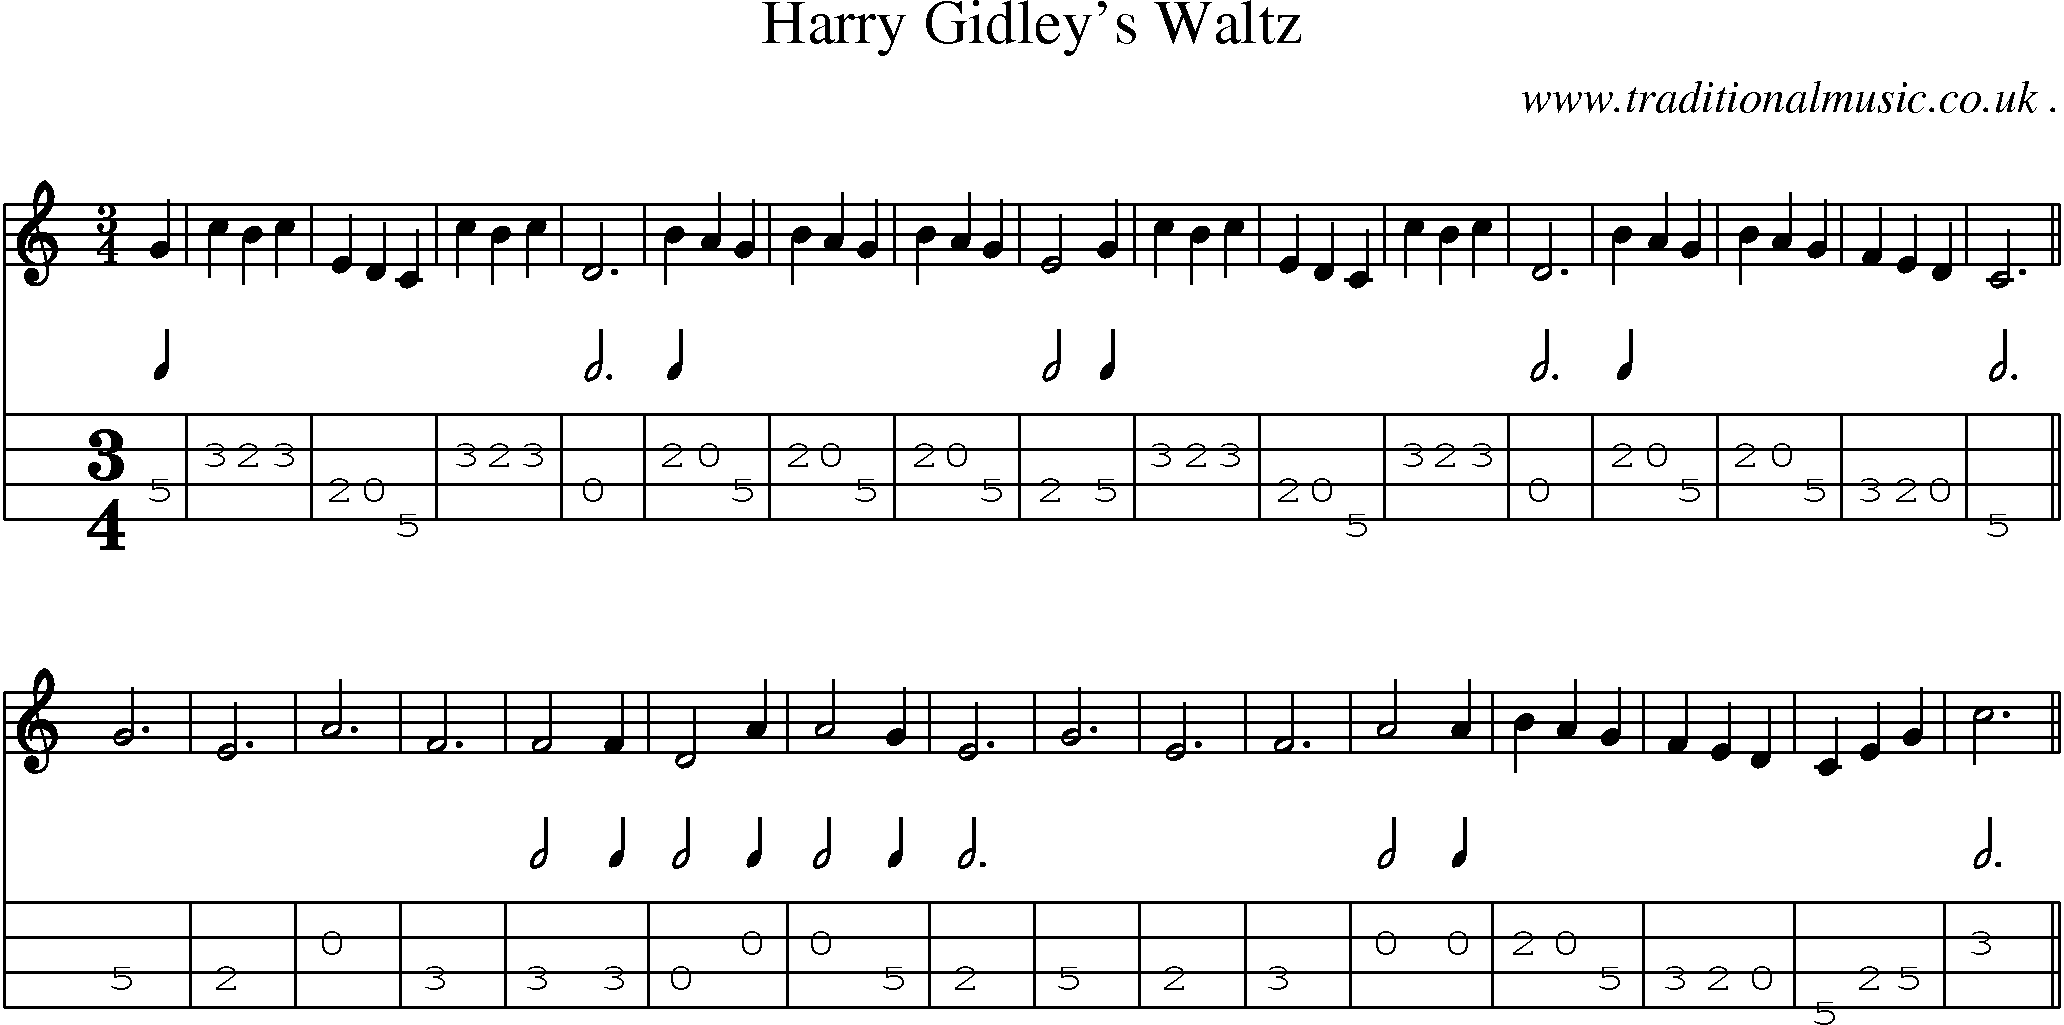 Sheet-music  score, Chords and Mandolin Tabs for Harry Gidleys Waltz